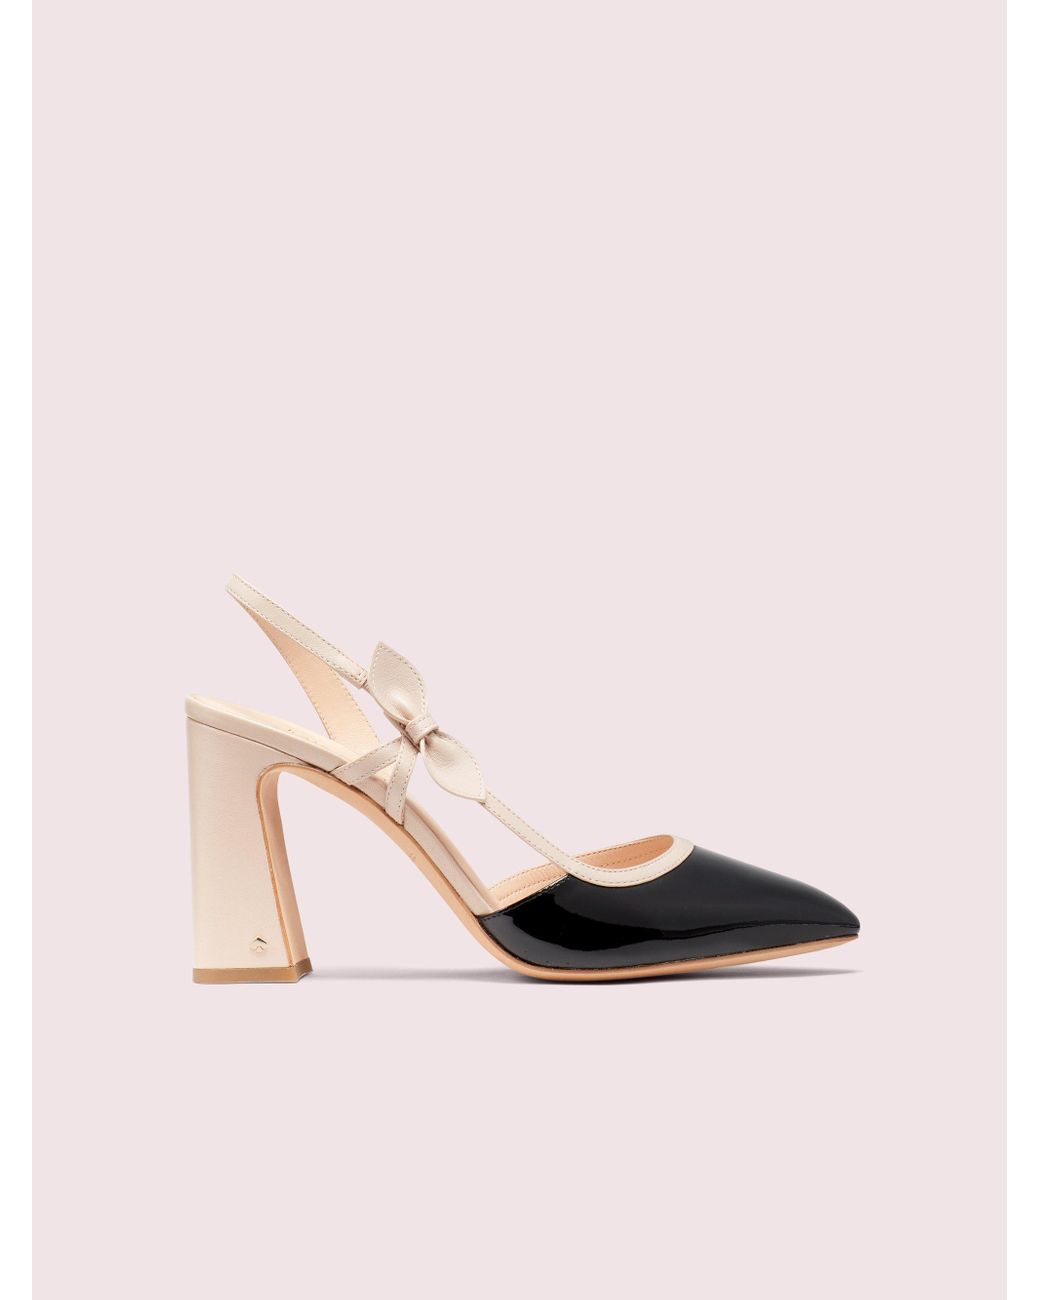 Kate Spade Leather Adelaide Pumps in Black - Lyst